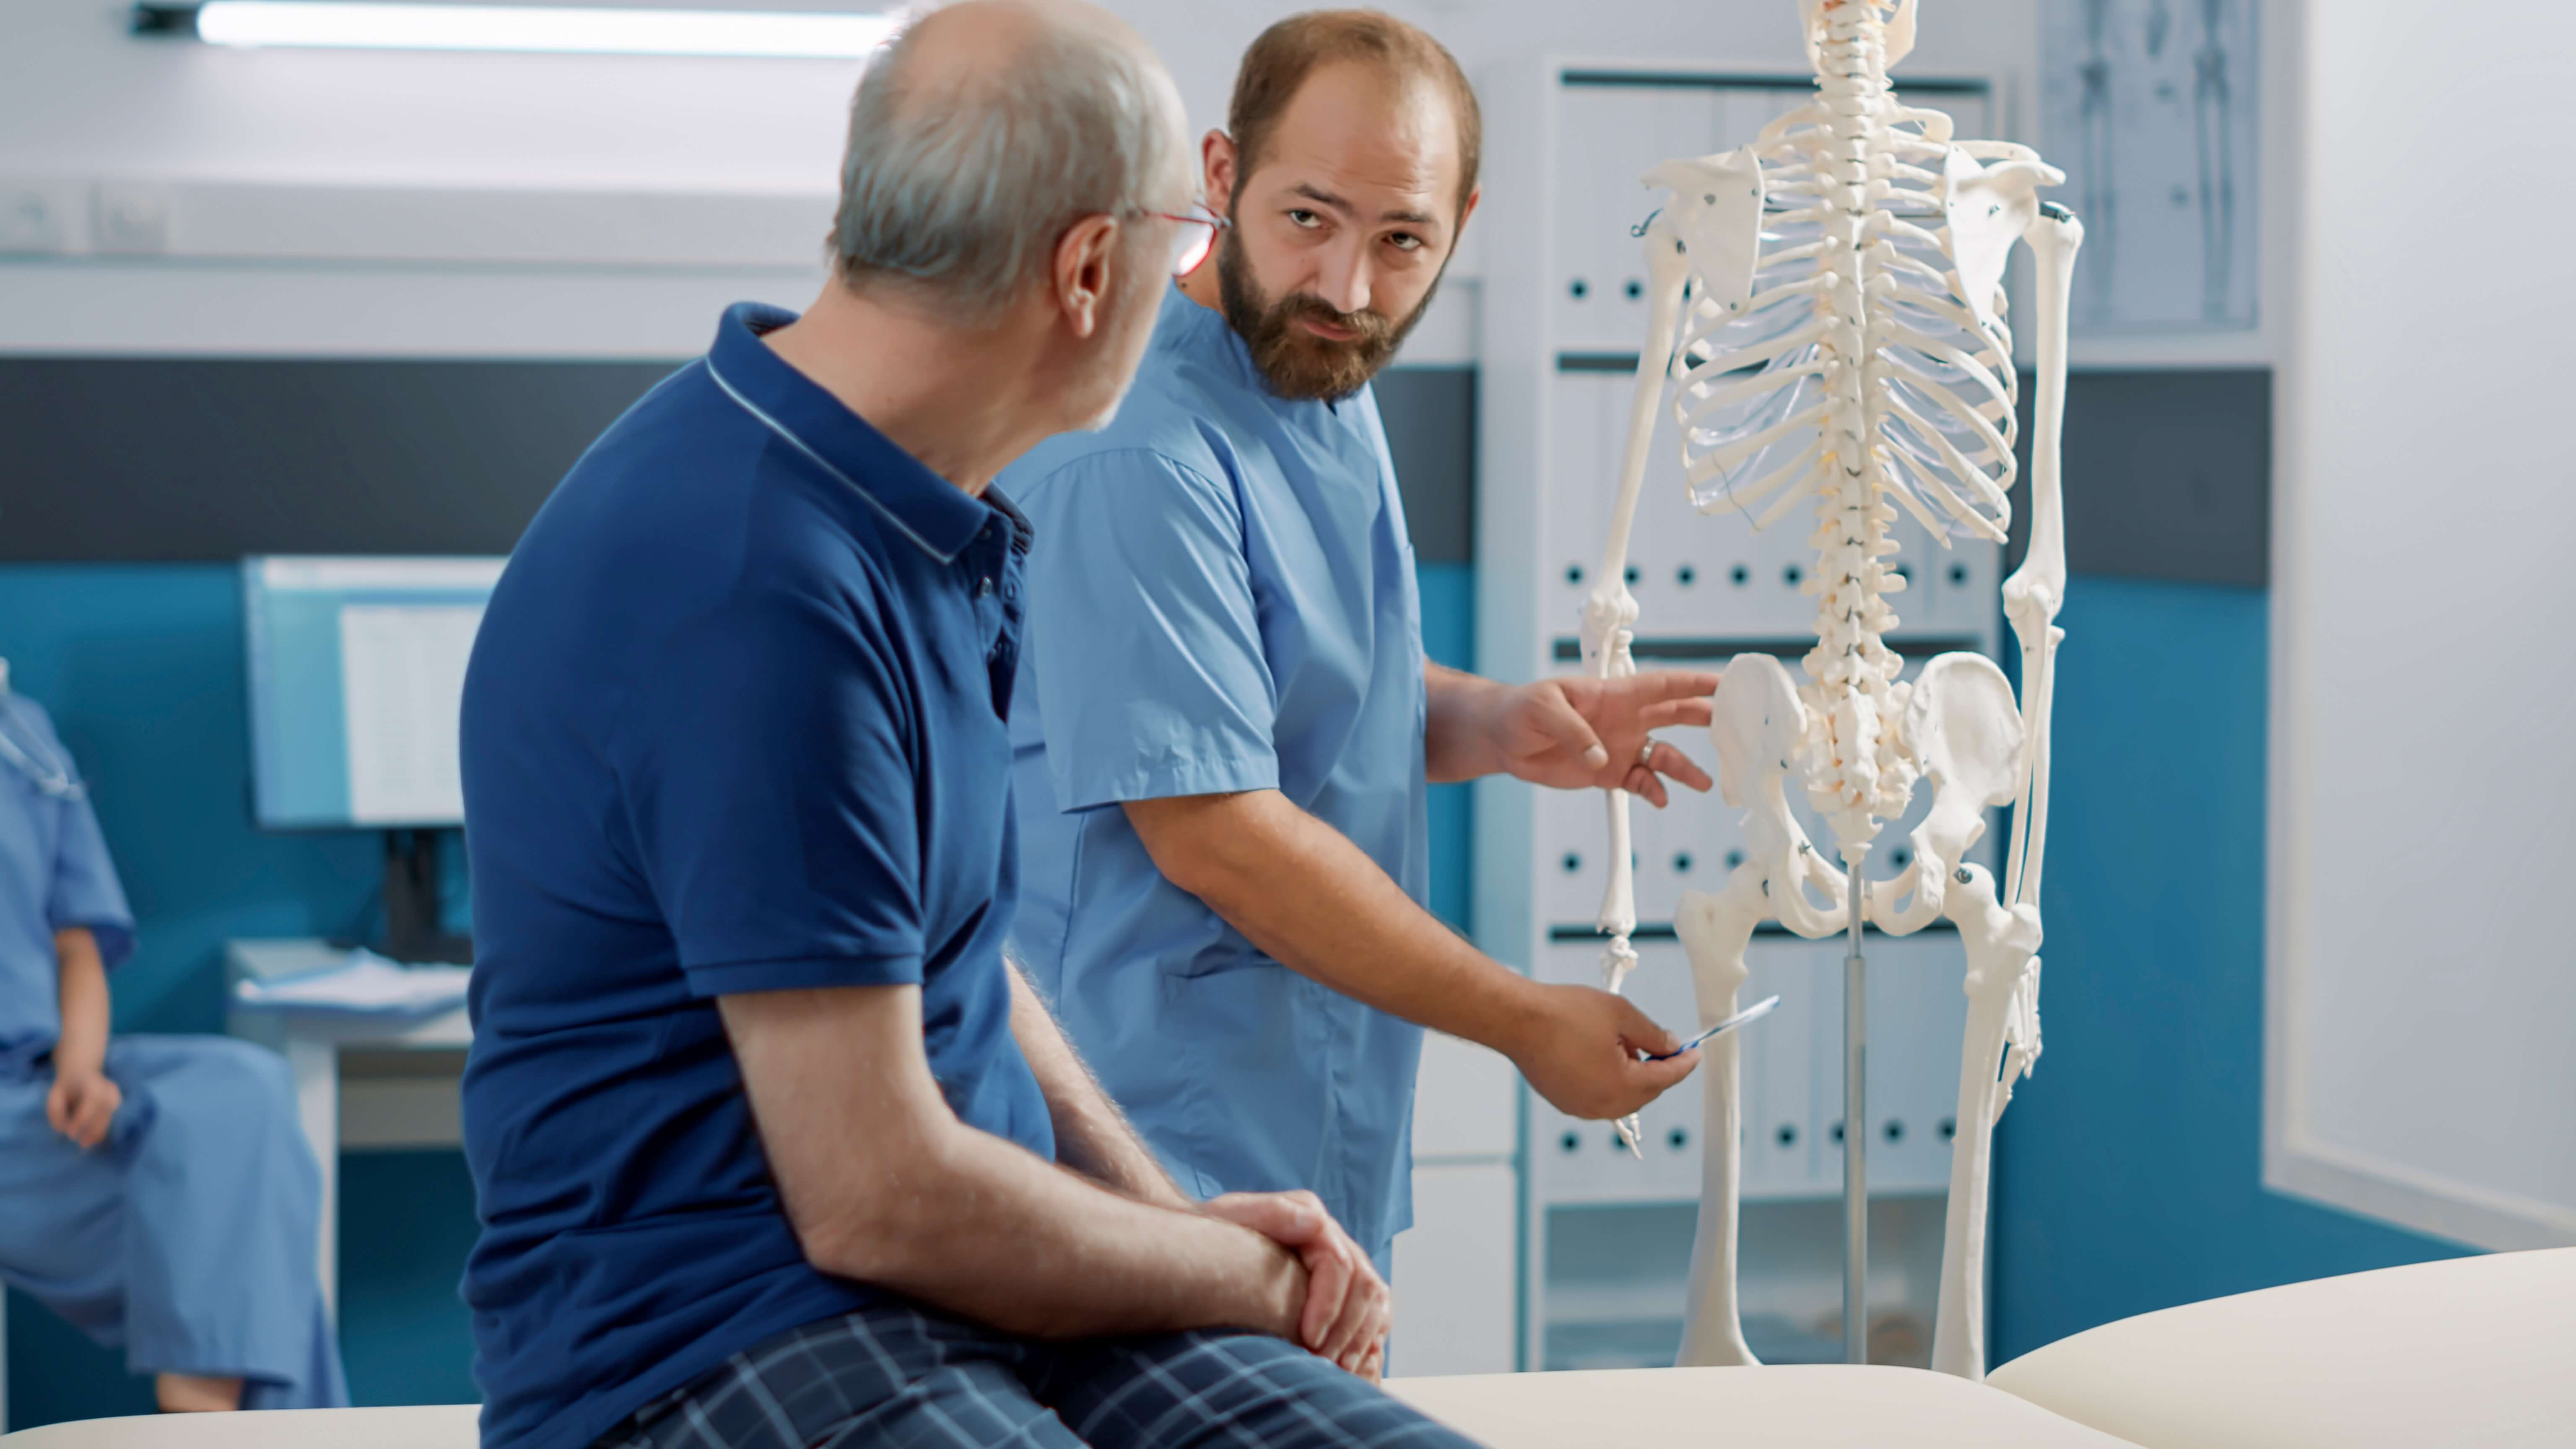 Image of chiropractor explaining condition to patient